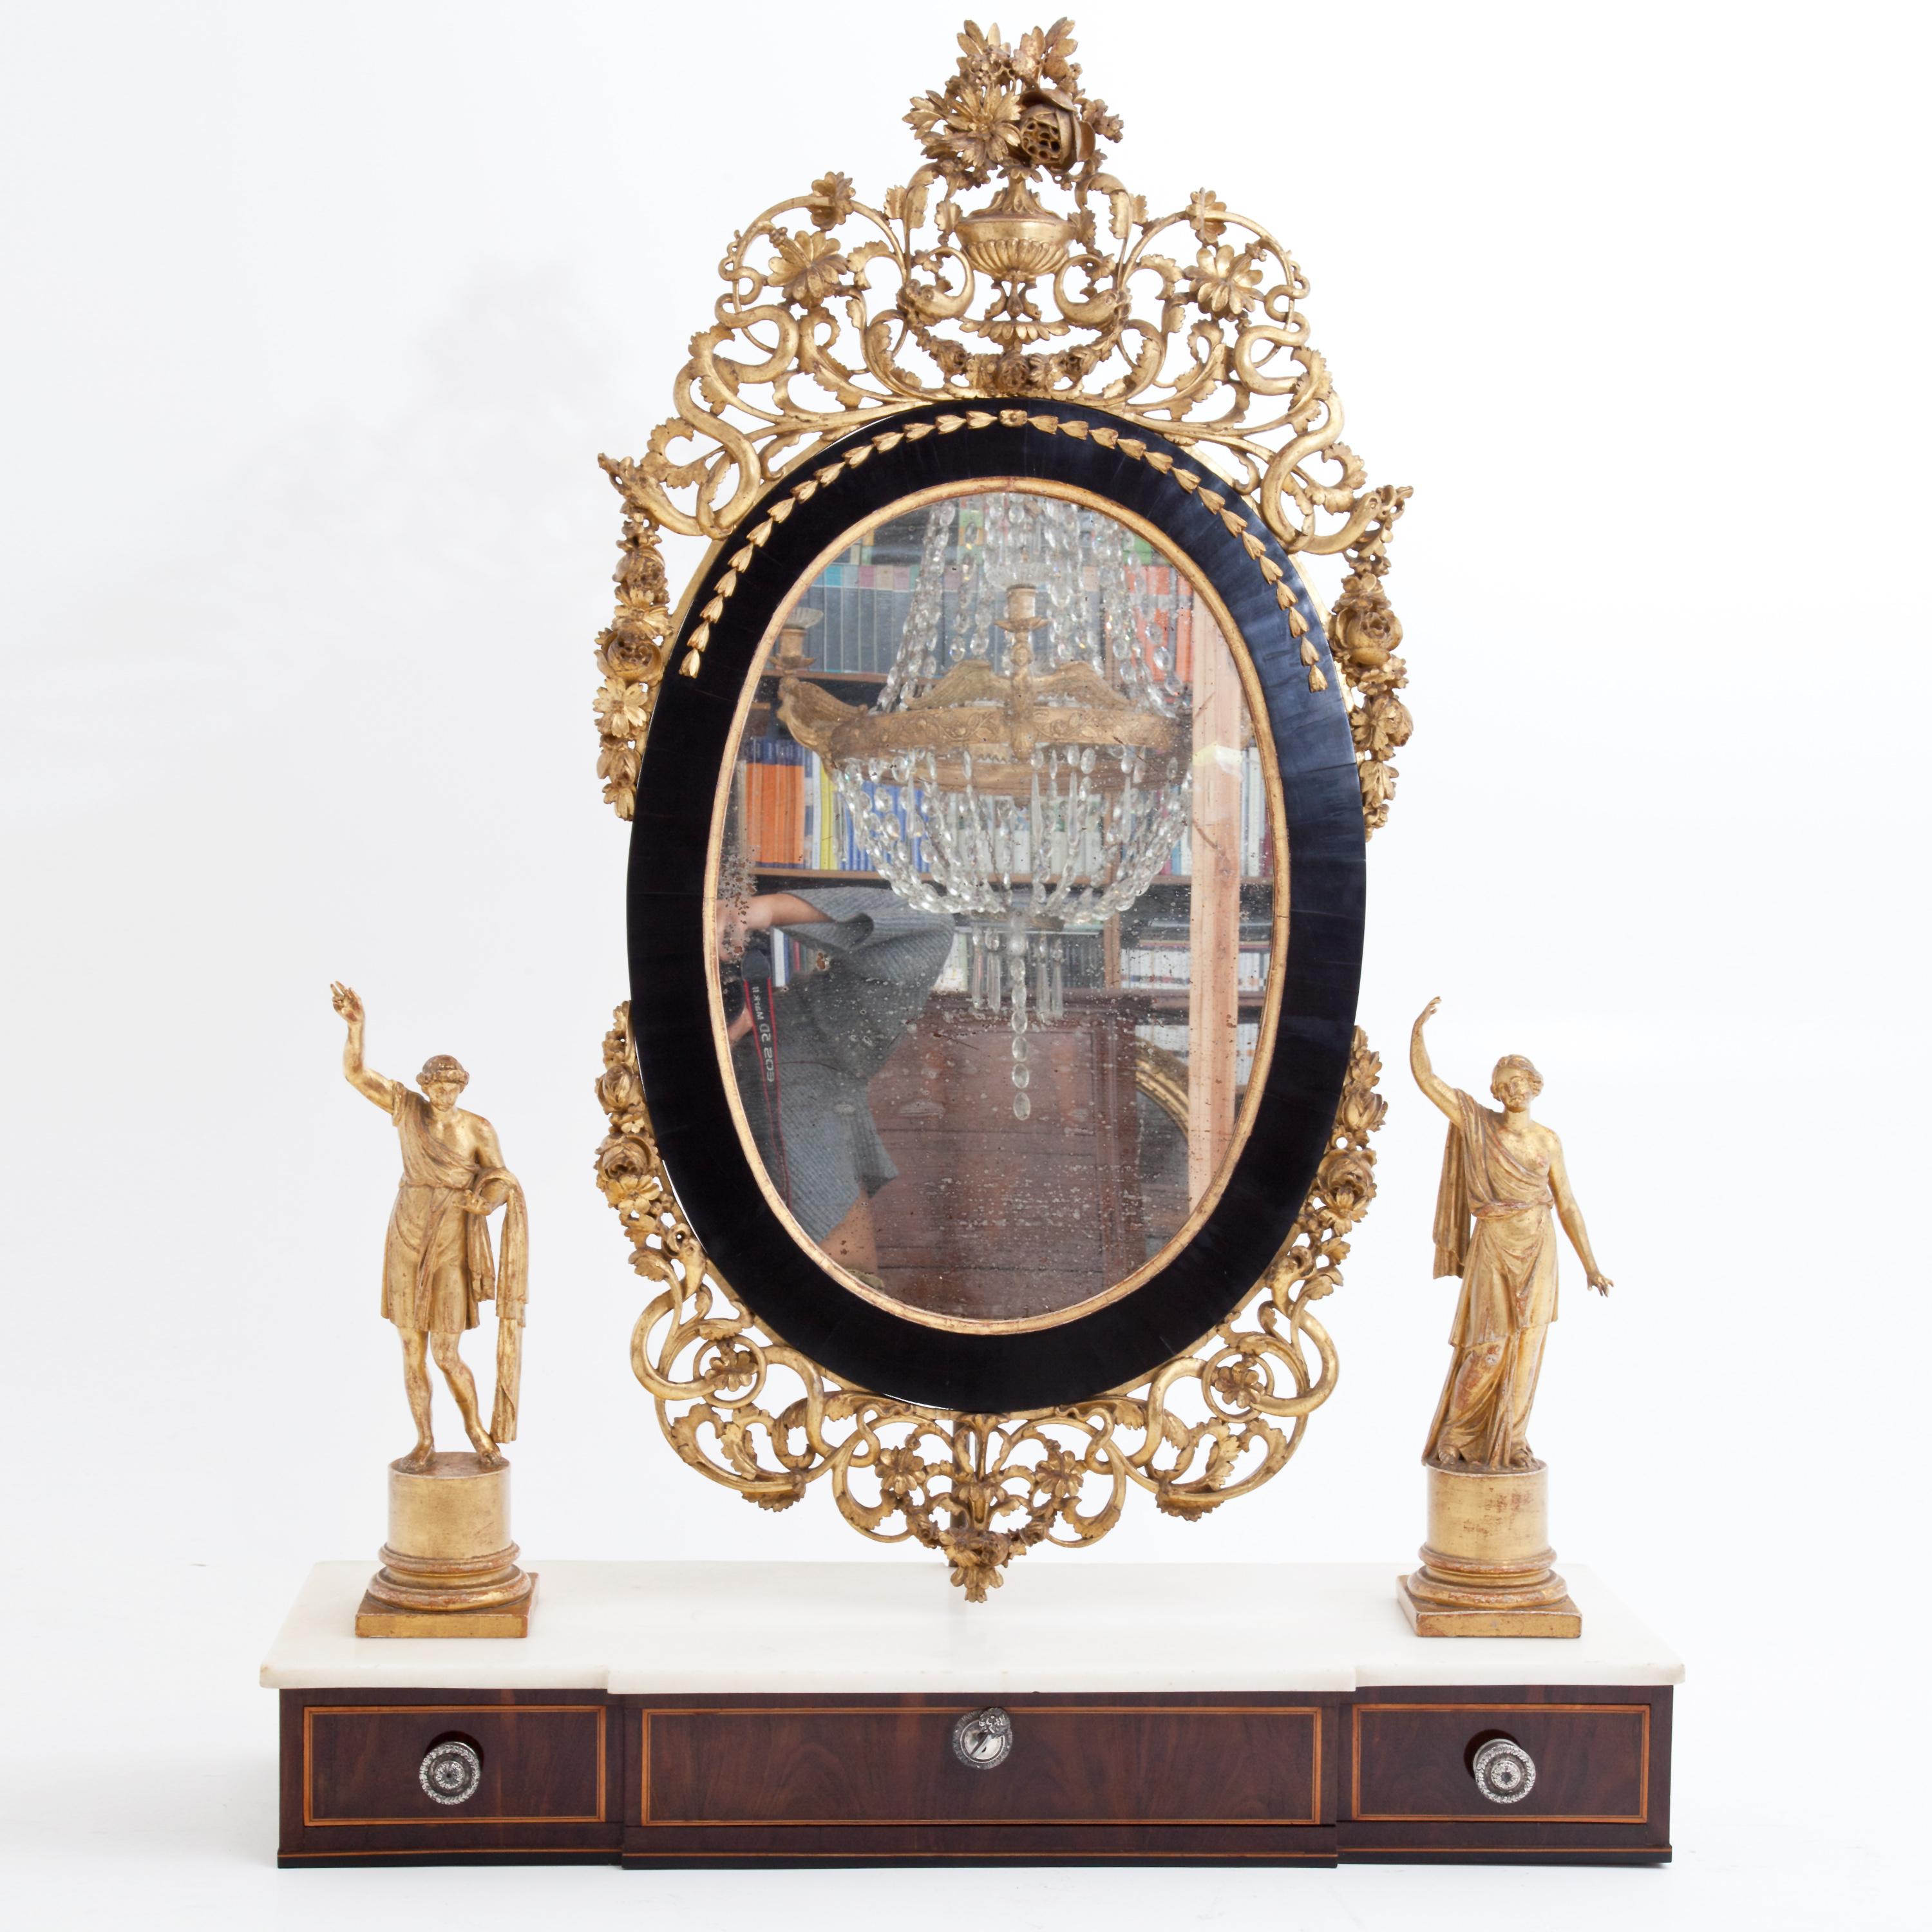 Mirror mounted on a wide drawer with silver handles in an oval black frame and rich tendril and flower decoration made of giltwood. The mirror is flanked by figurative bronzes in antique habit mounted on the marble top. The drawer front is veneered